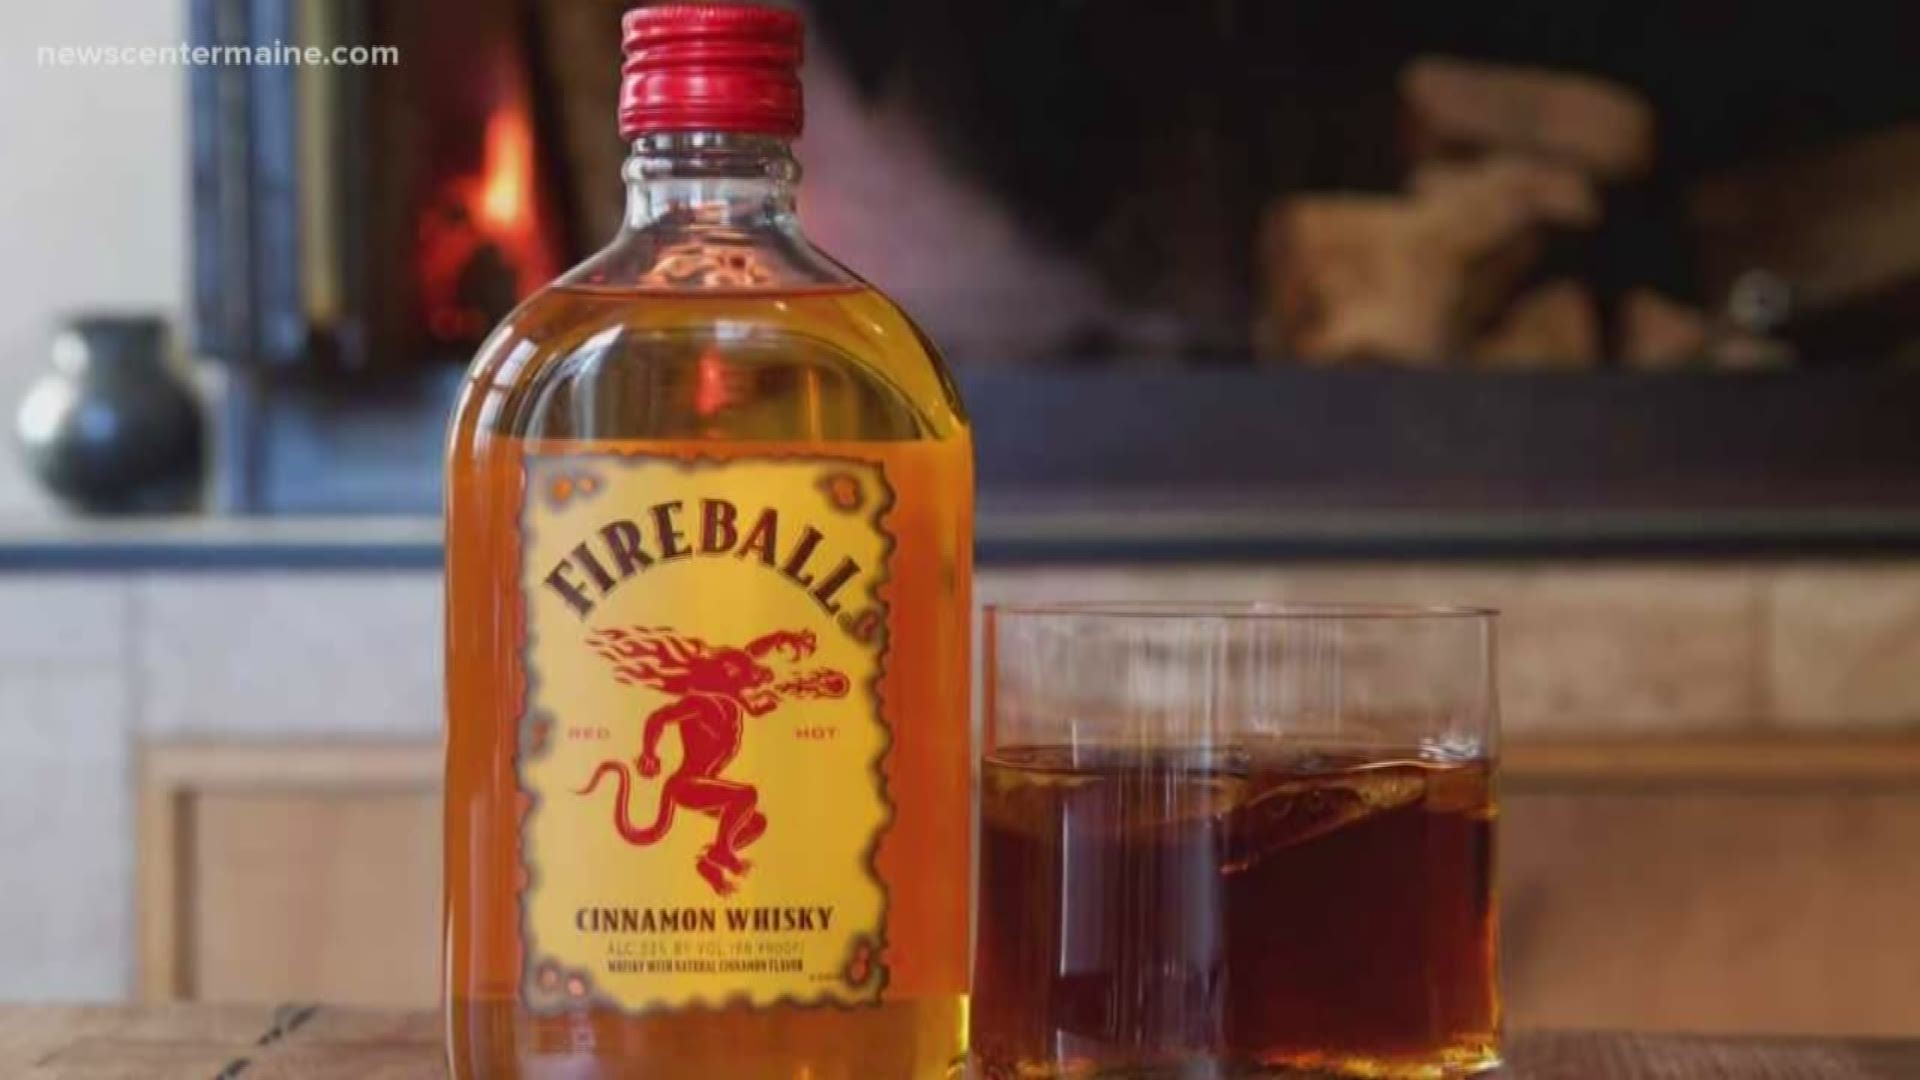 The people who make Fireball Cinnamon Whiskey are going to expand their production hours. It is expected to bring 46 new full-time jobs to Lewiston.